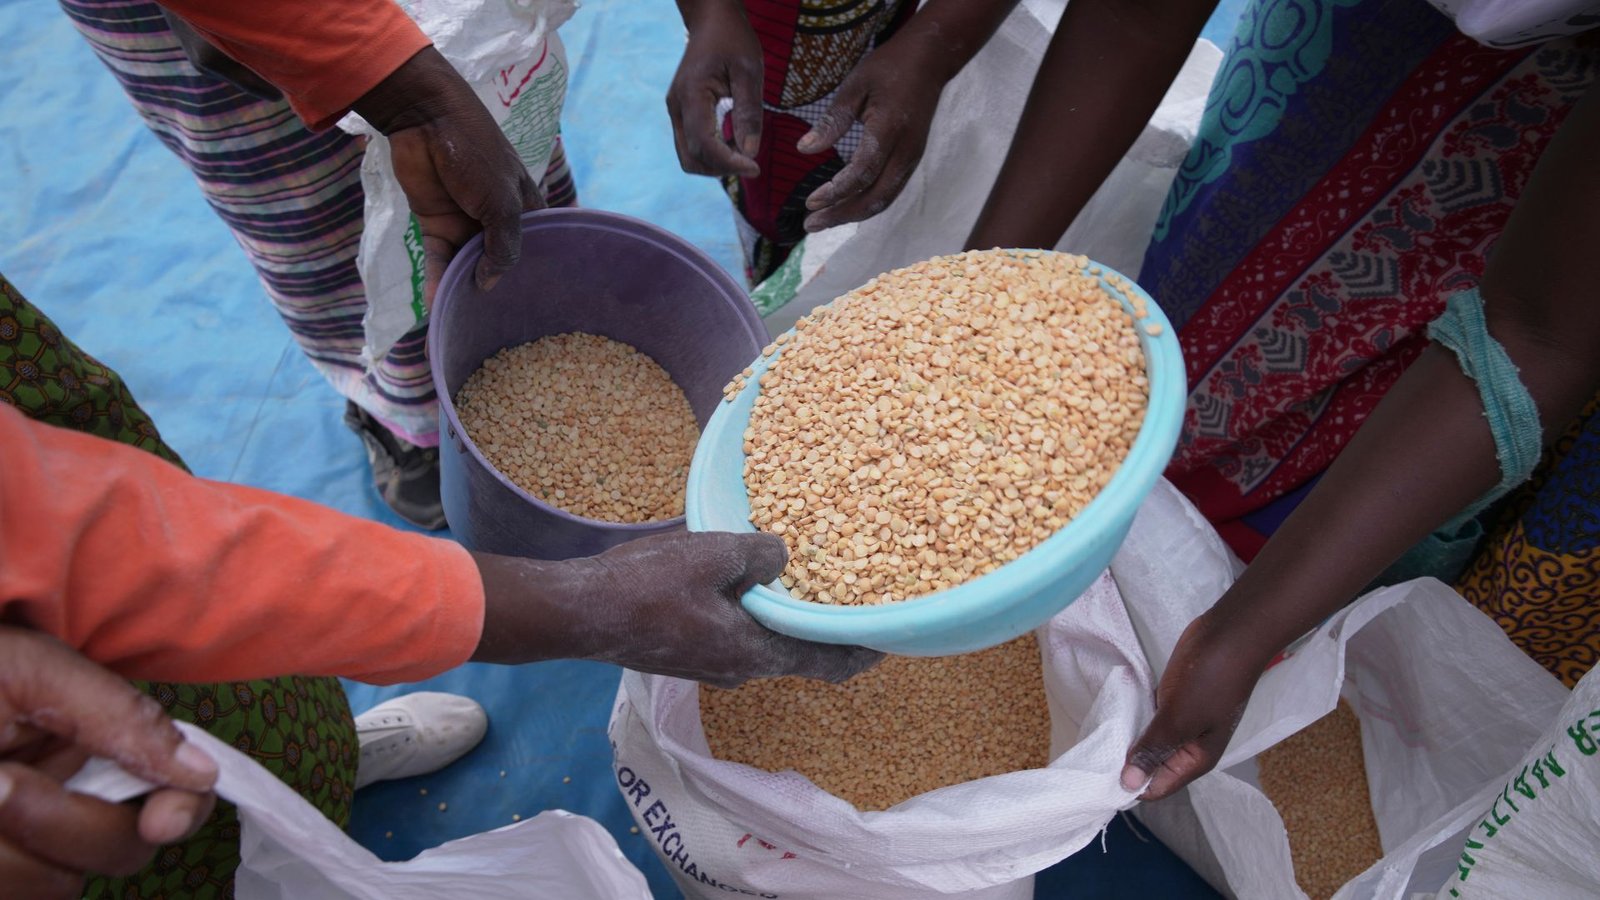 How can we reduce global food insecurity | Hunger